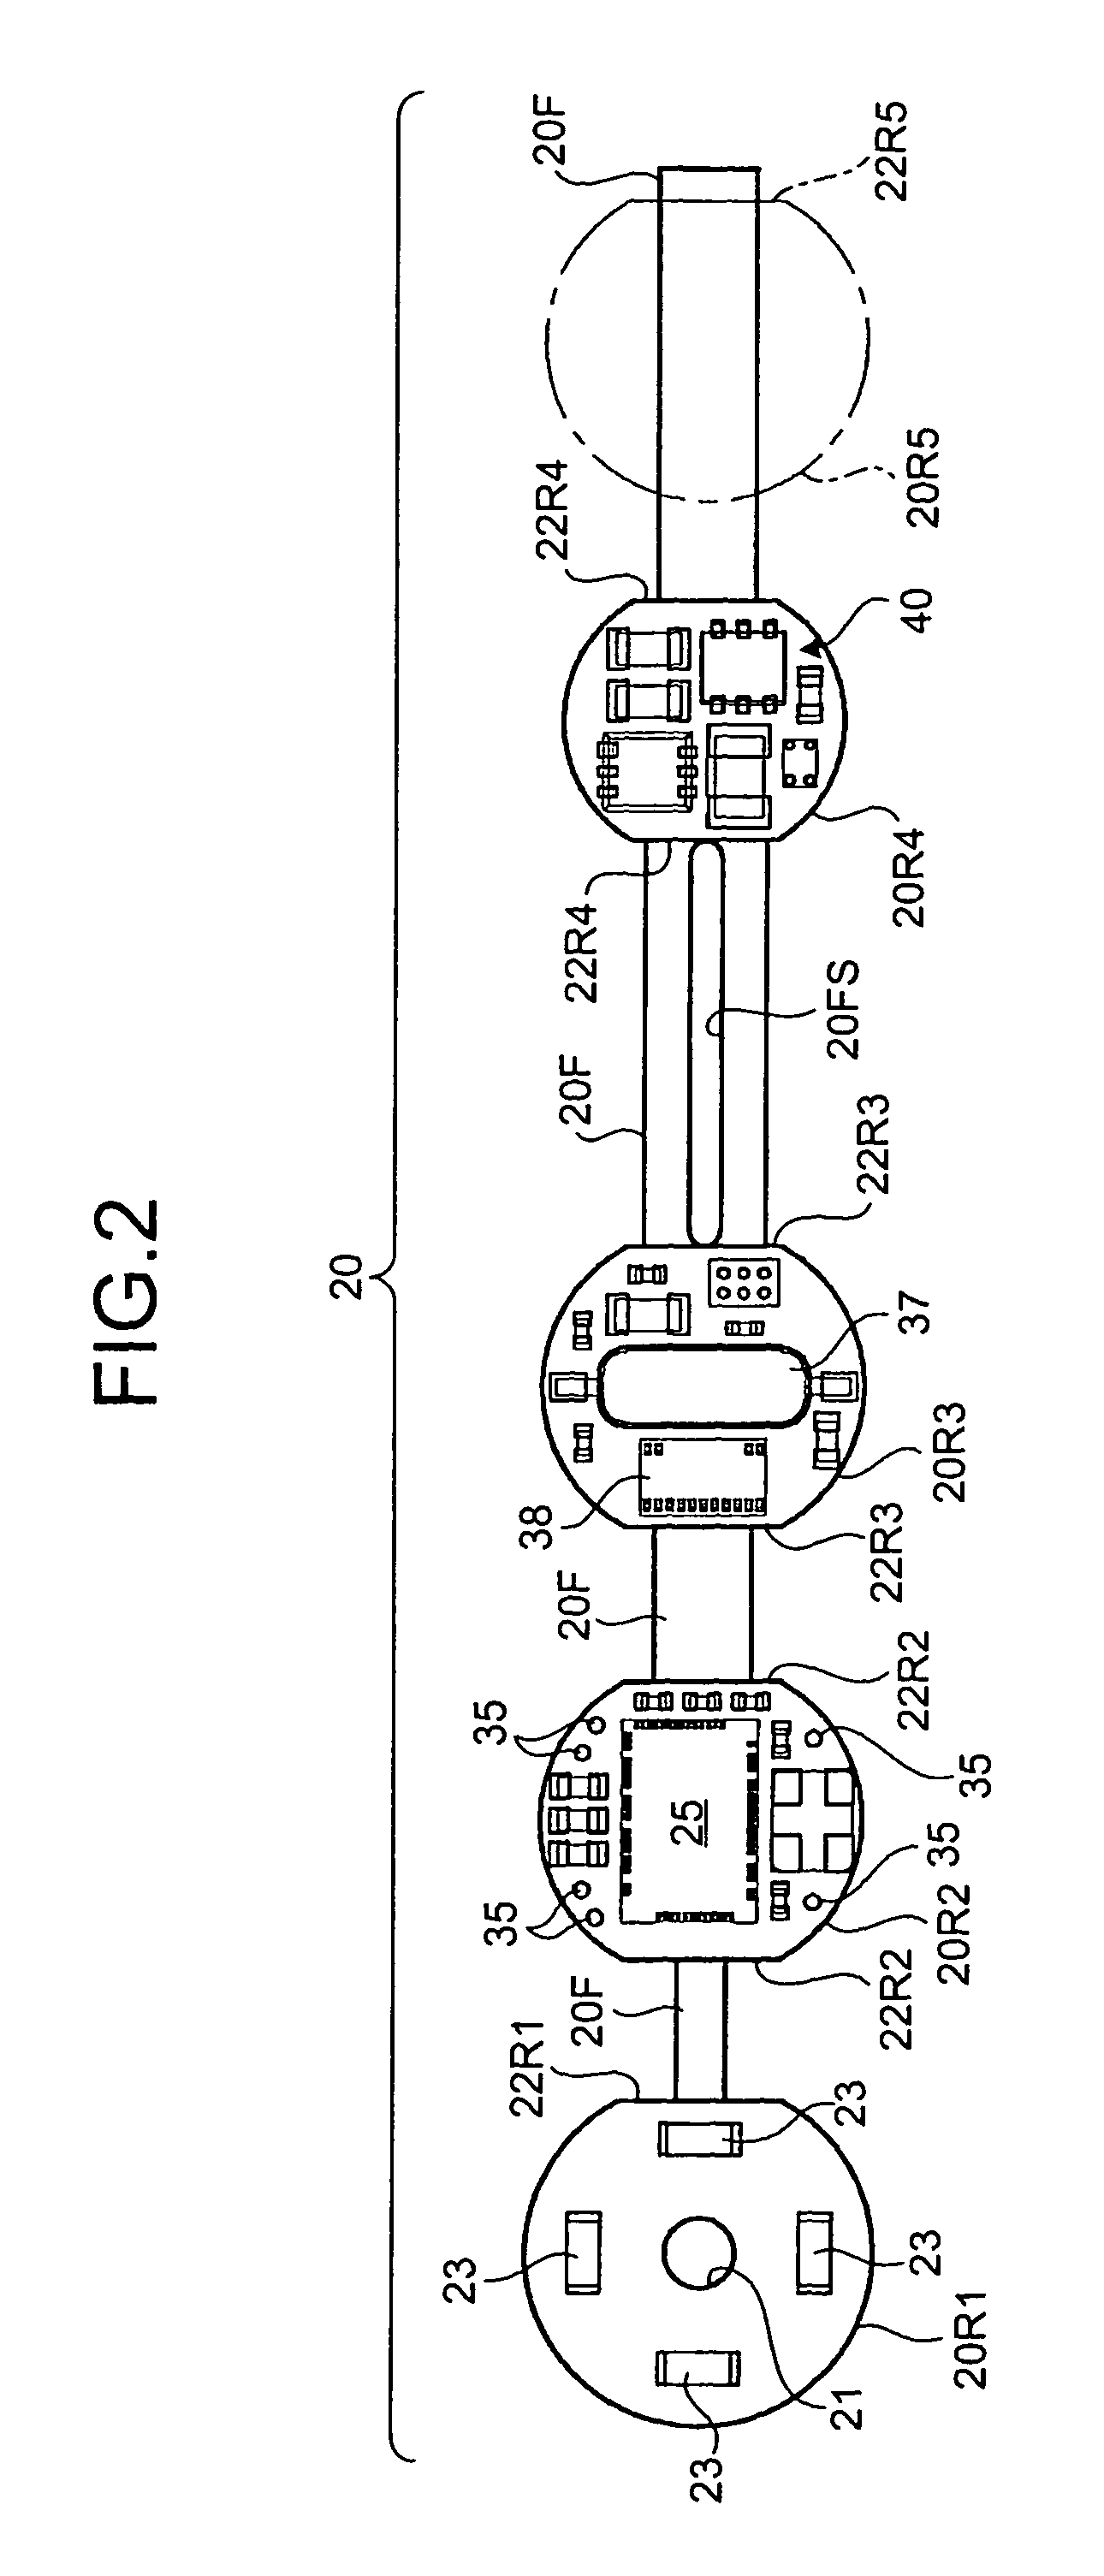 Capsule apparatus with rigid and flexible wiring board sections